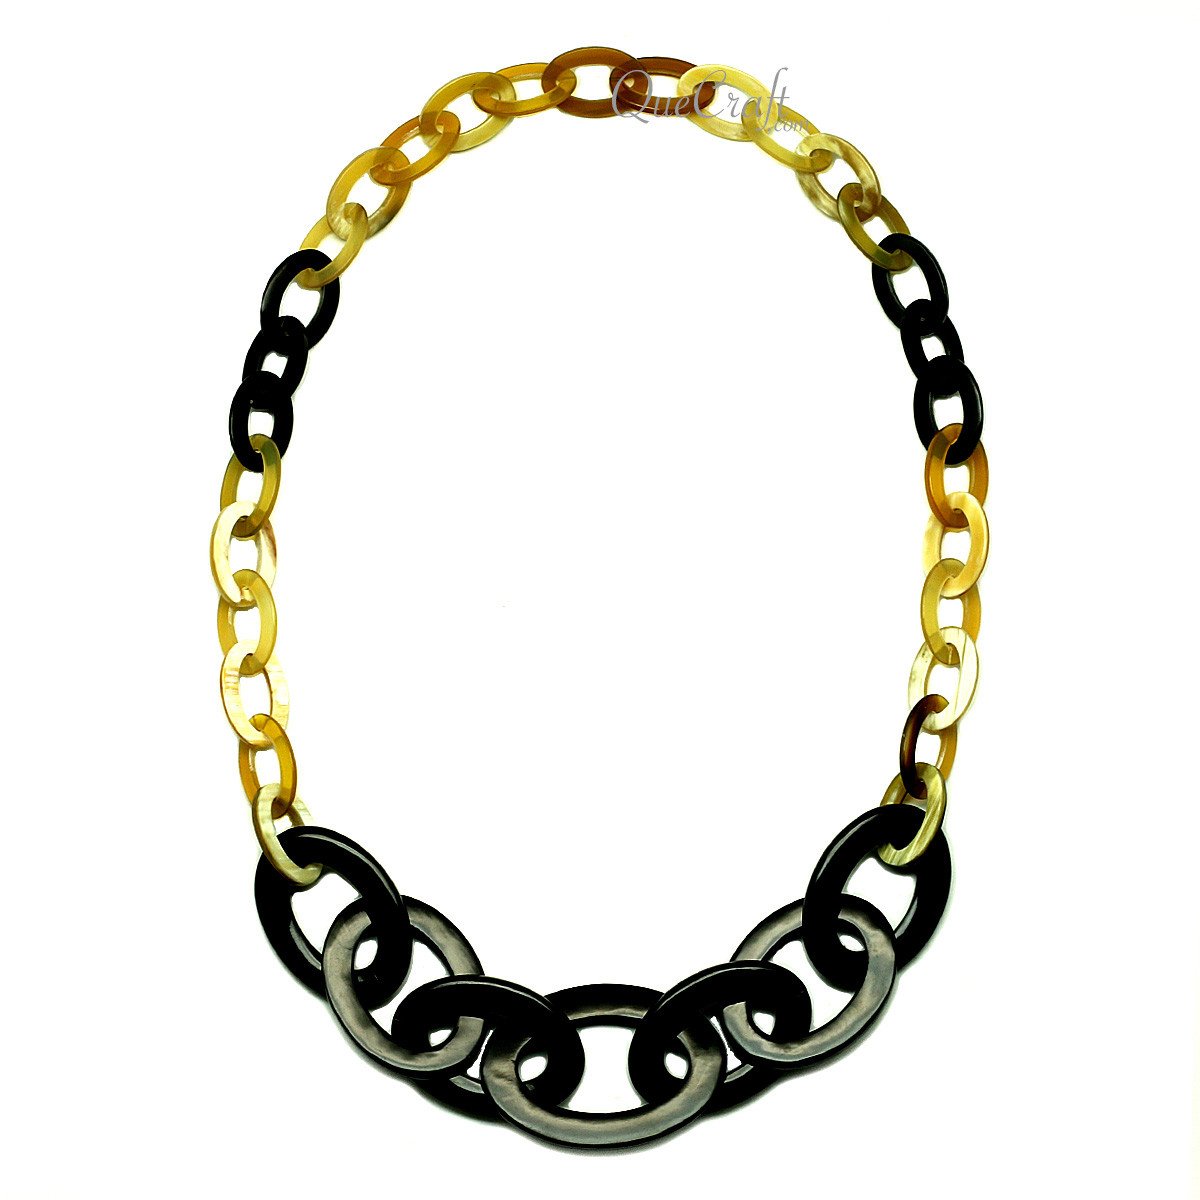 Horn Chain Necklace #12755 - HORN JEWELRY